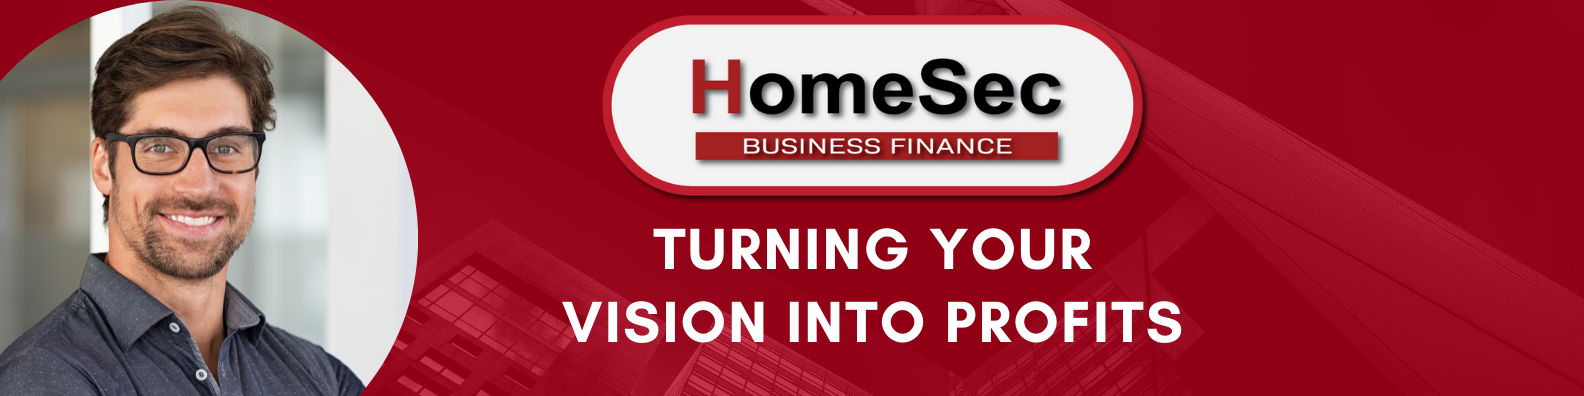 Homesec- Turning your vision into profits